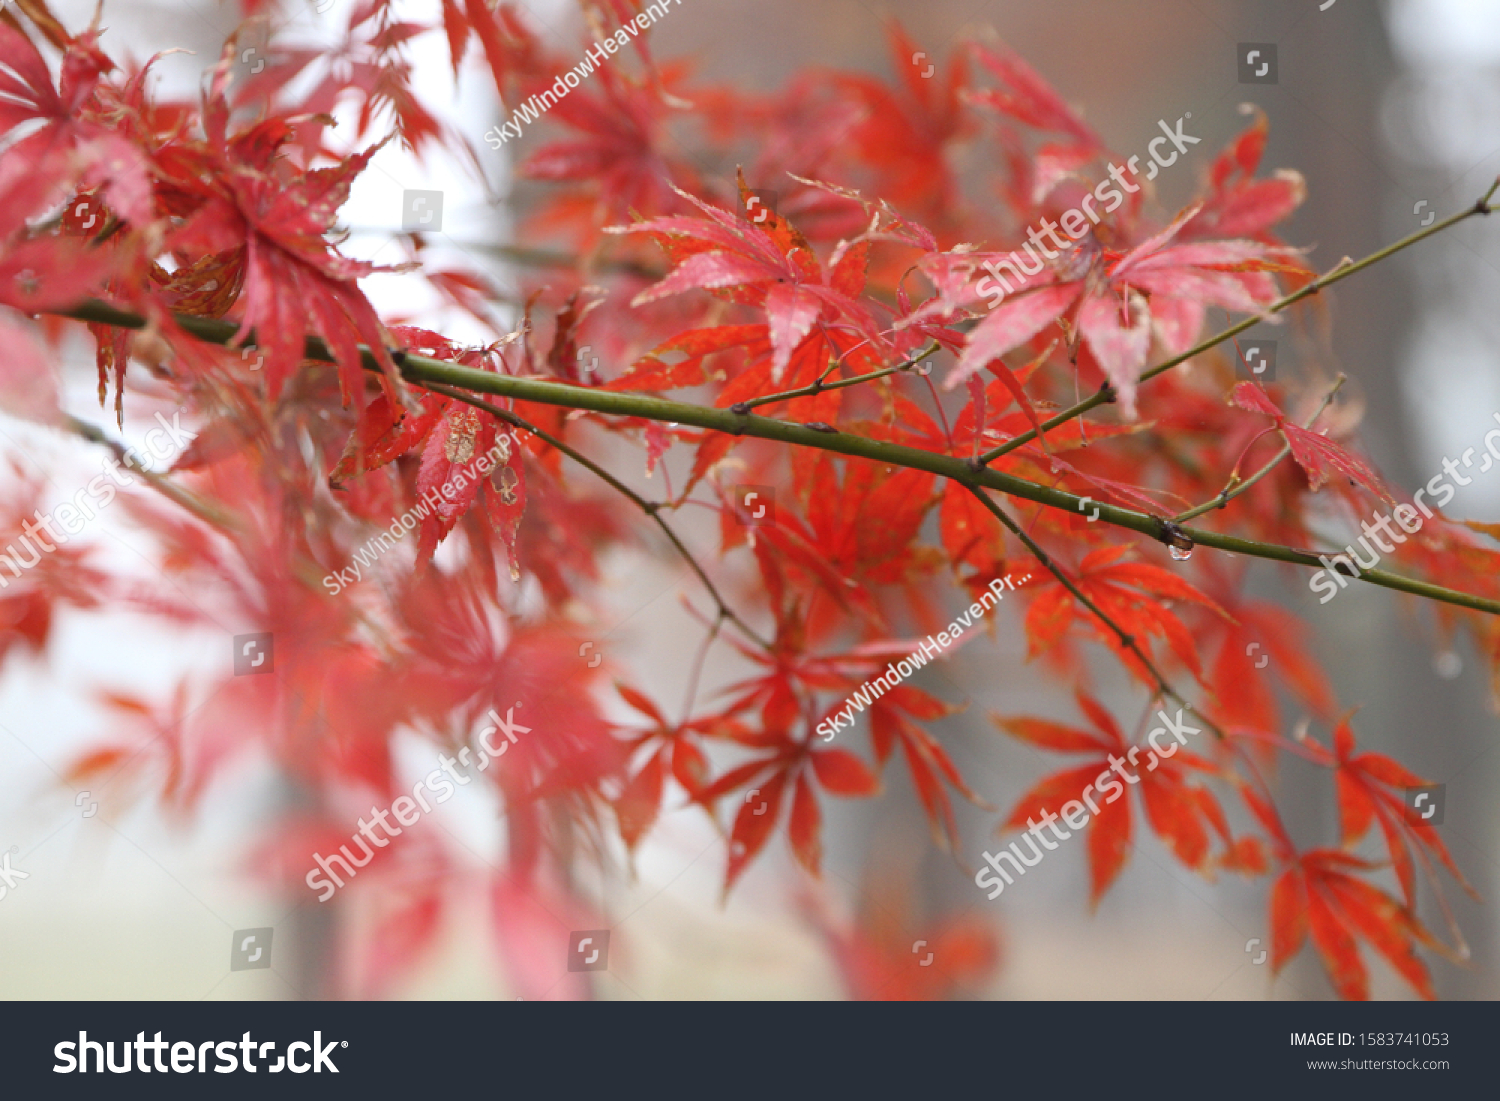 Maple leaves in East Lake, Wuhan, China #1583741053